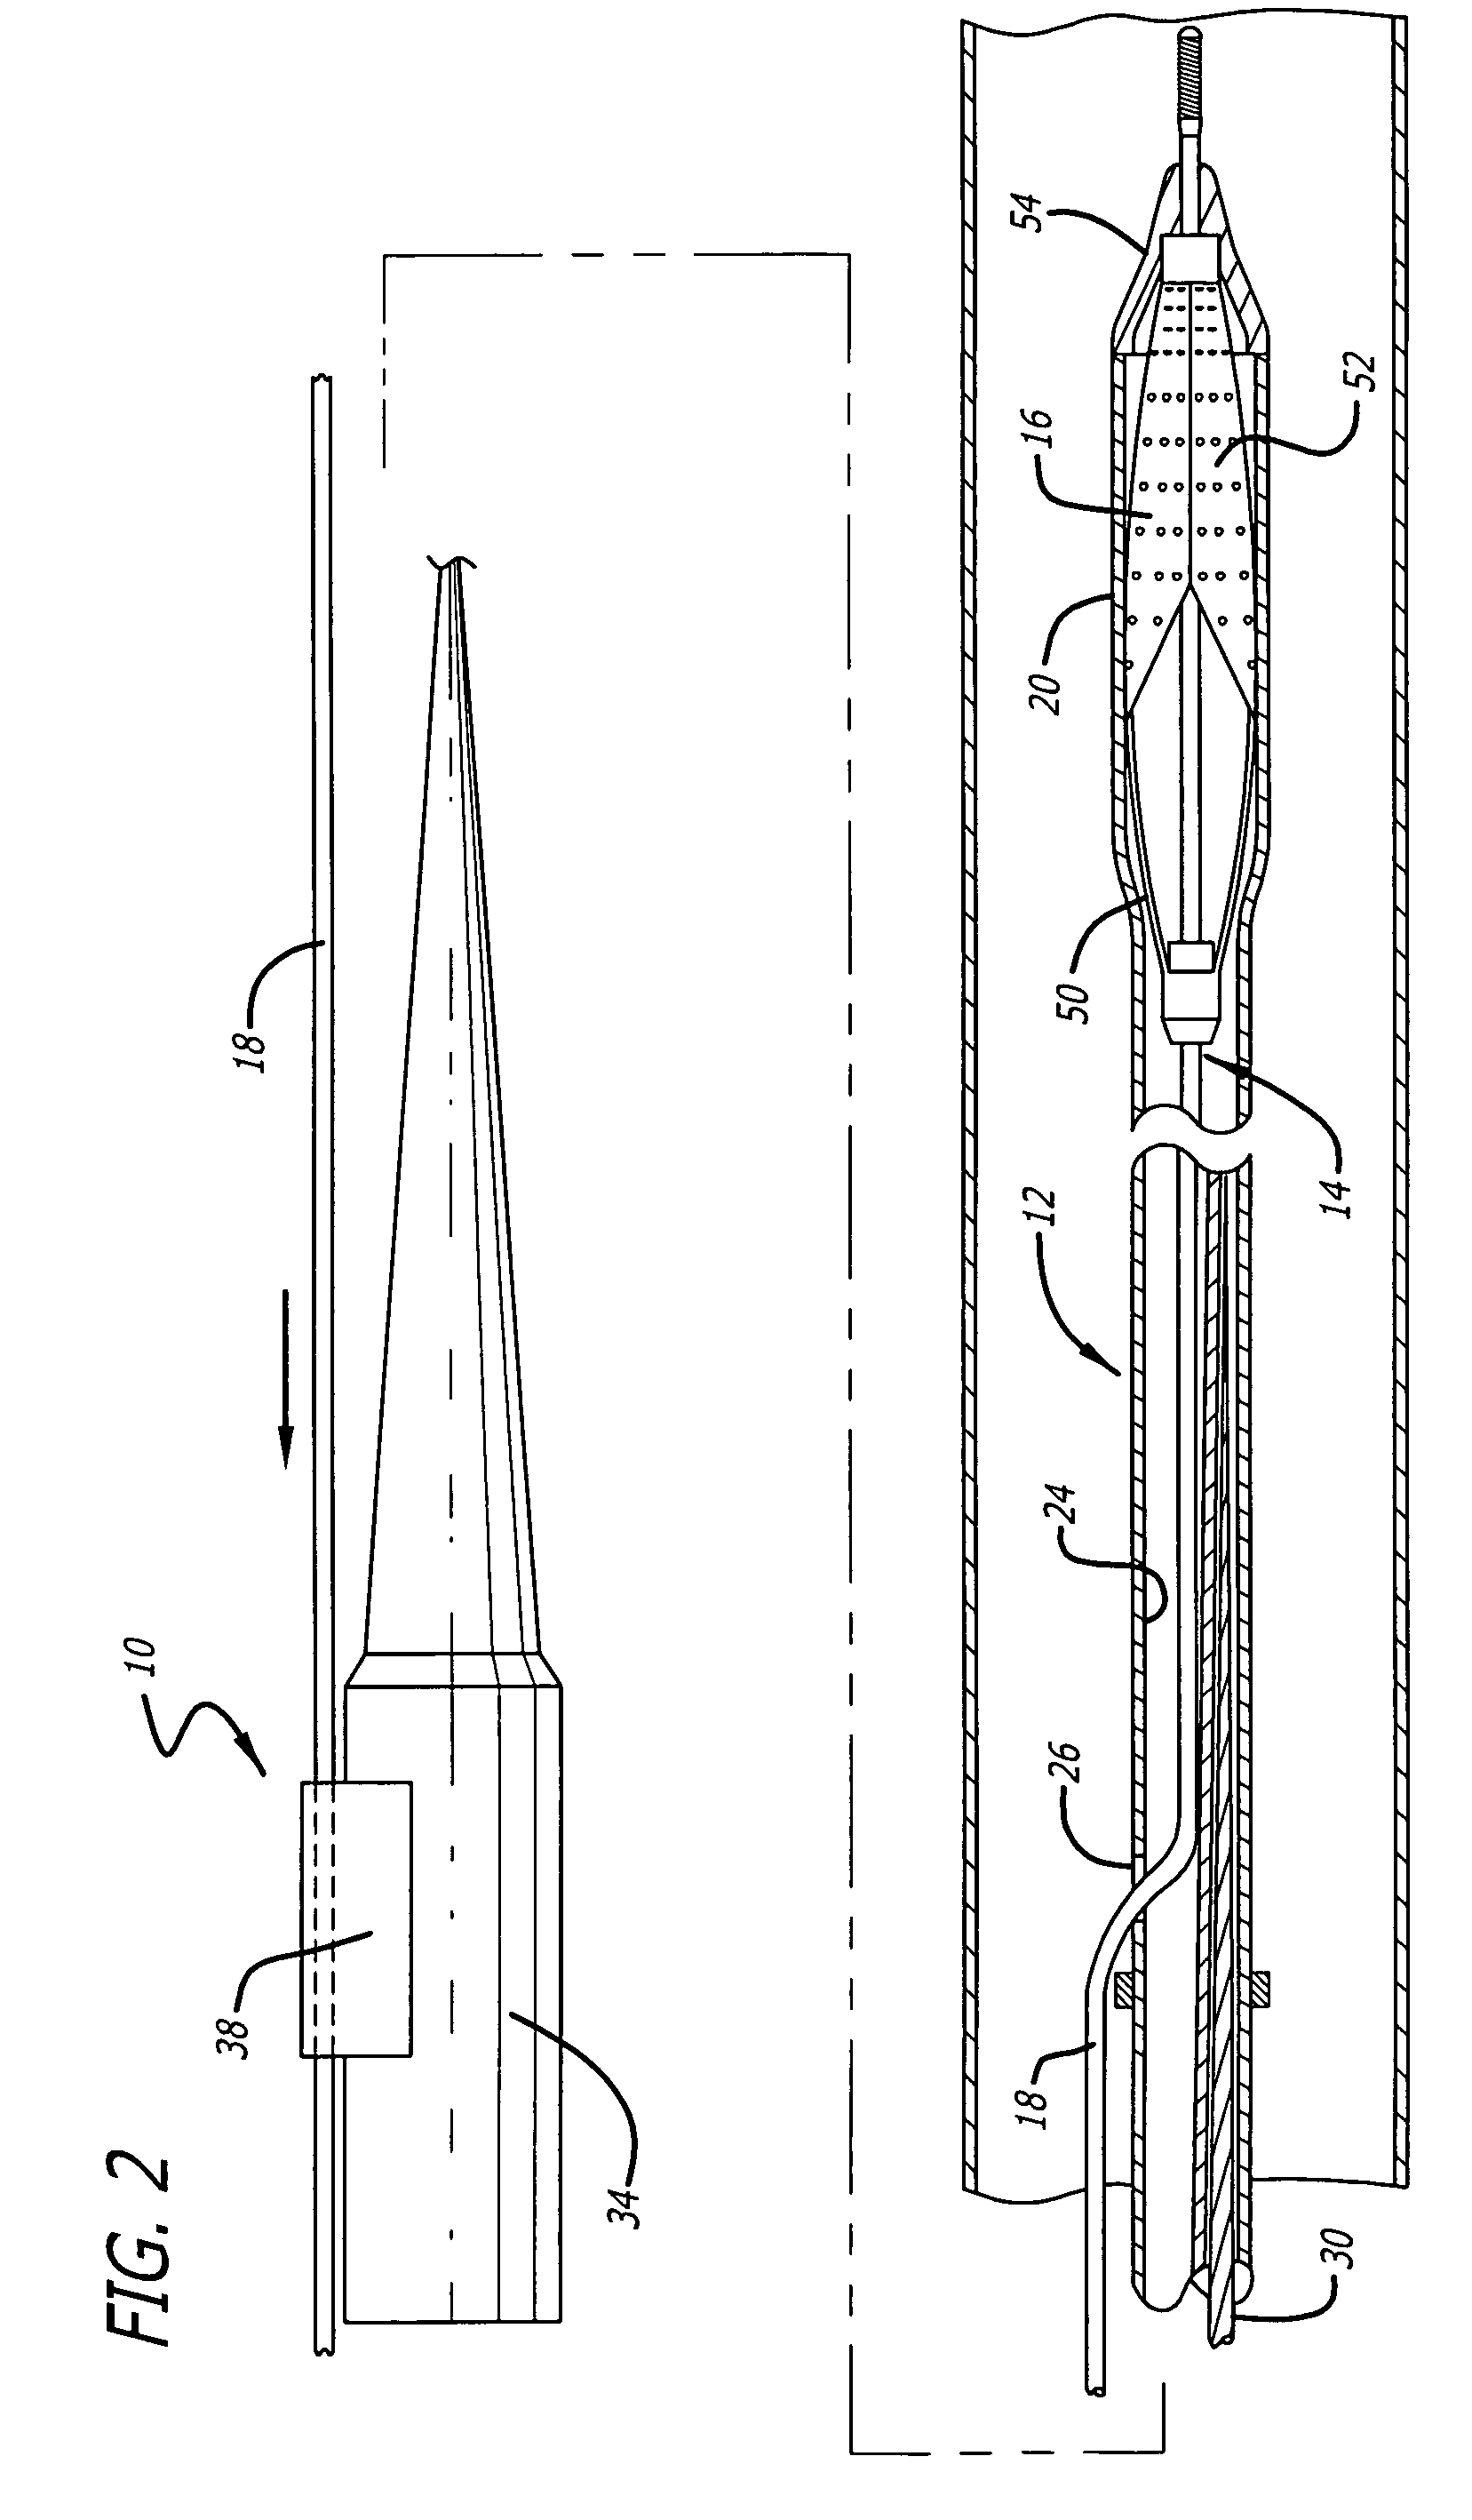 Guide wire locking mechanism for rapid exchange and other catheter systems